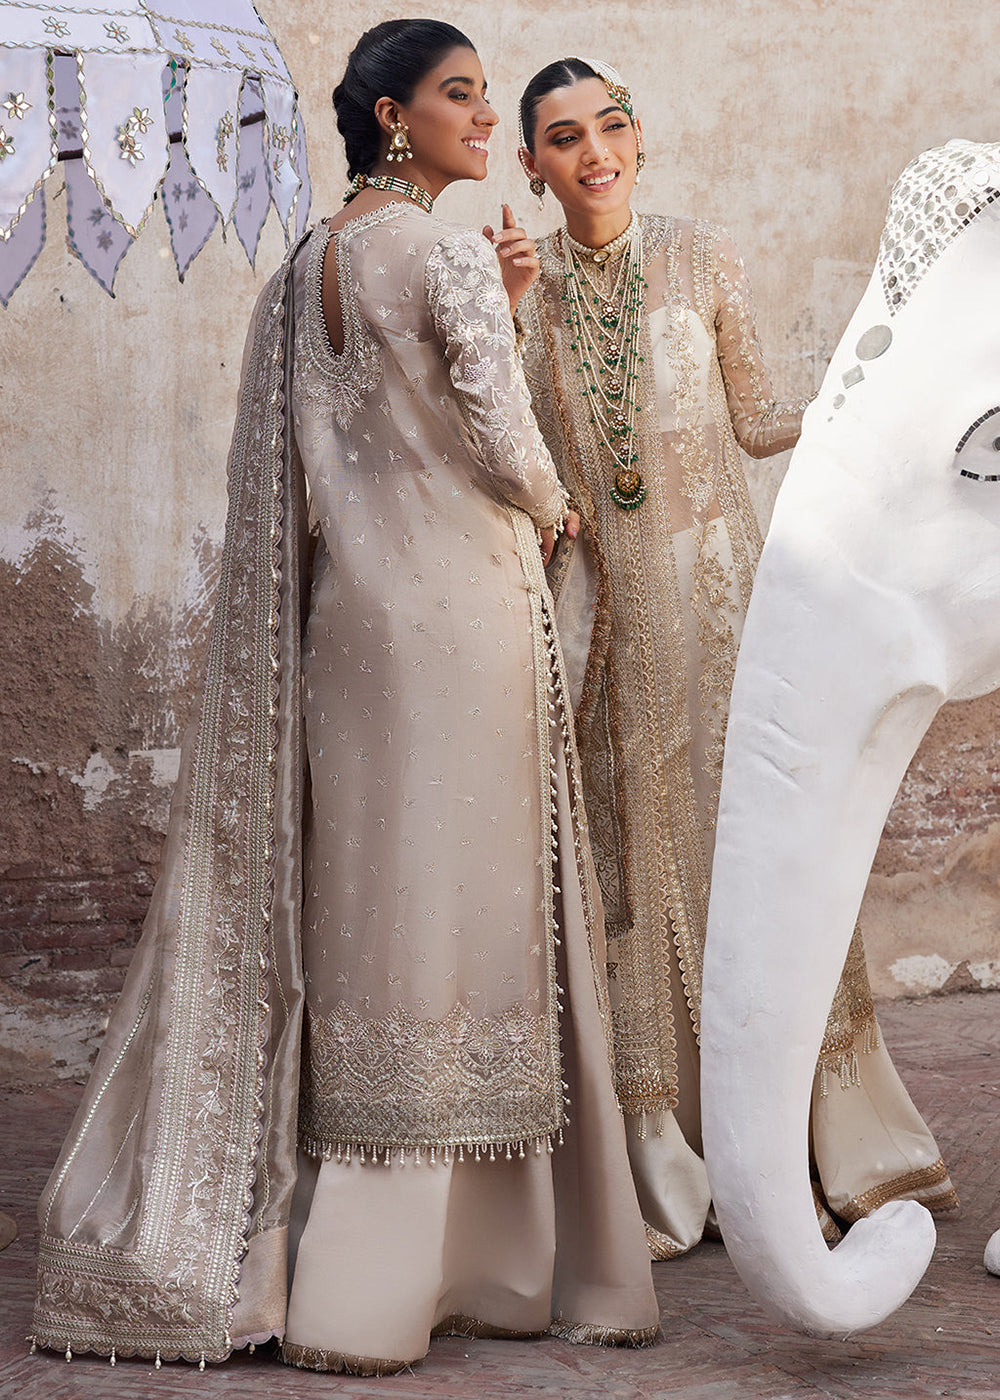 Buy Now Dastangoi Wedding Formals 23 by Afrozeh - Ulfat Online in USA, UK, Canada & Worldwide at Empress Clothing.